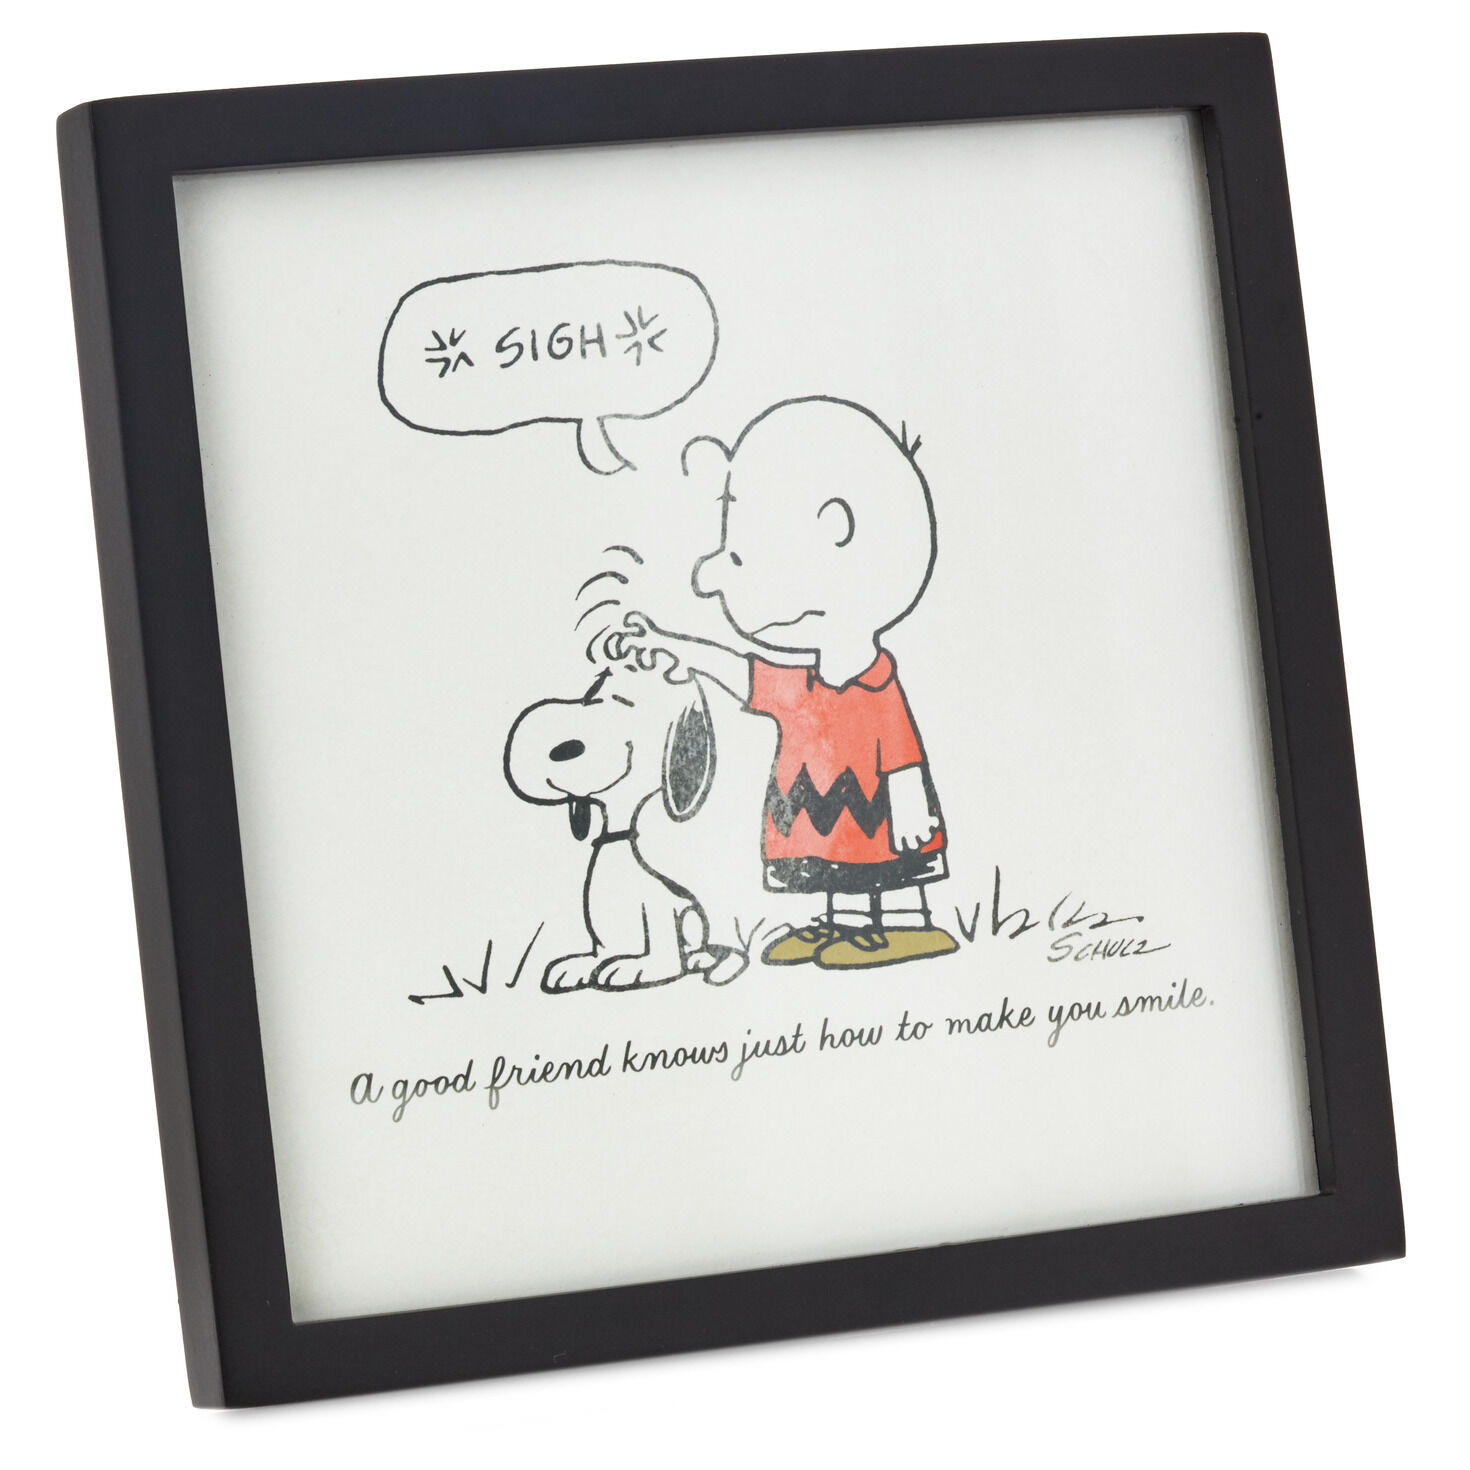 Snoopy Laughing With Woodstock Hee Hee Blank Textured Card Hallmark Friendship 